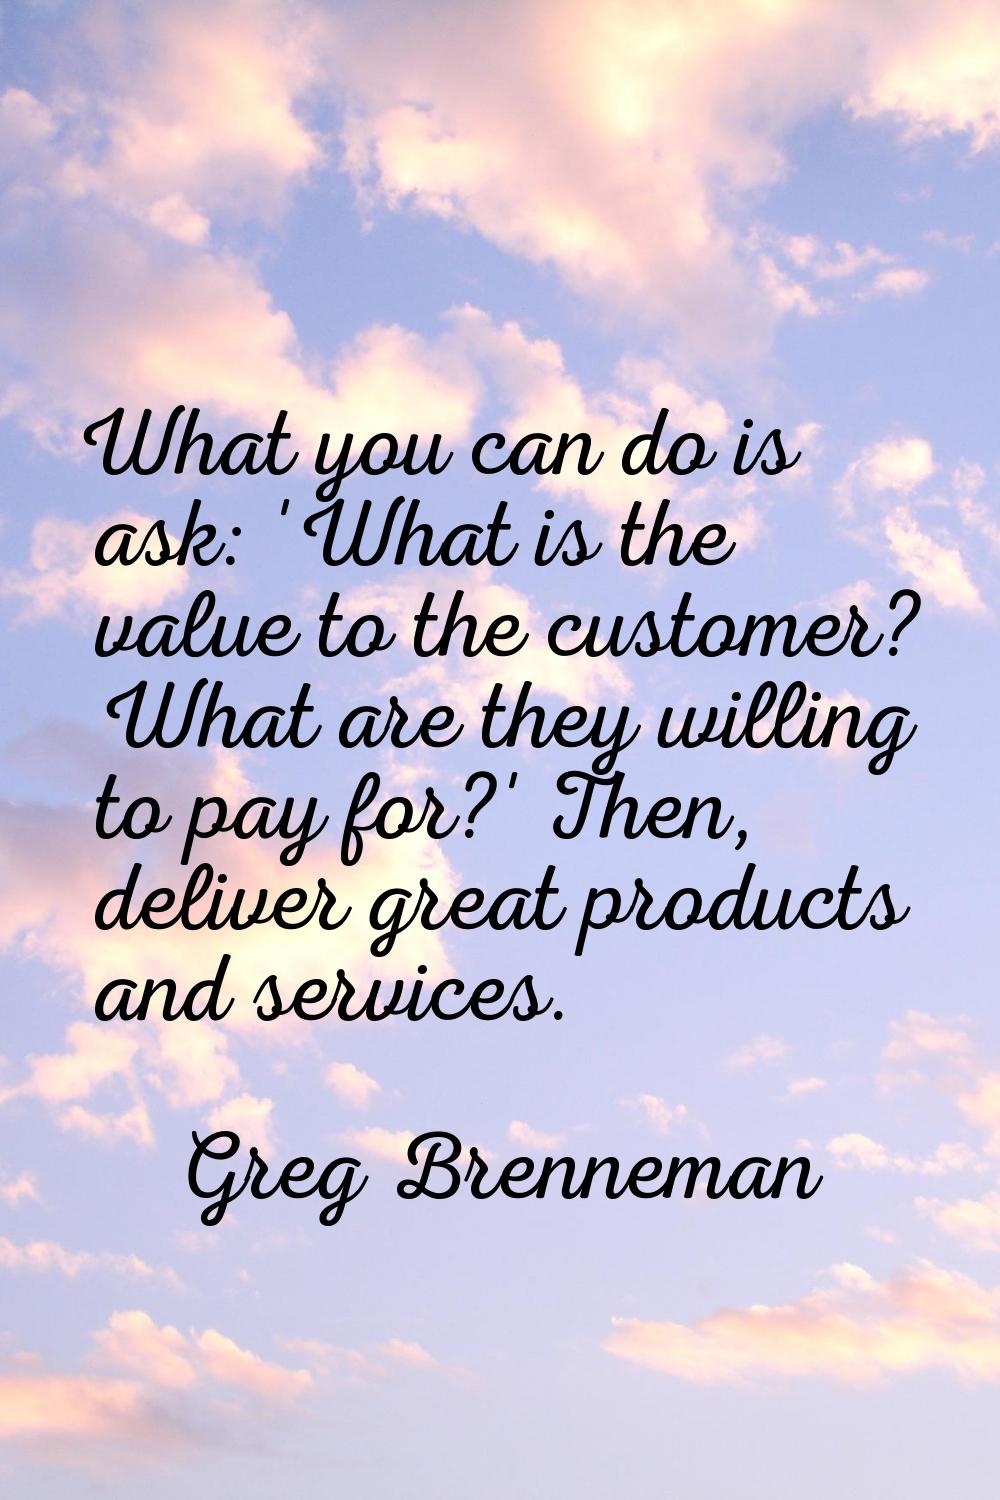 What you can do is ask: 'What is the value to the customer? What are they willing to pay for?' Then